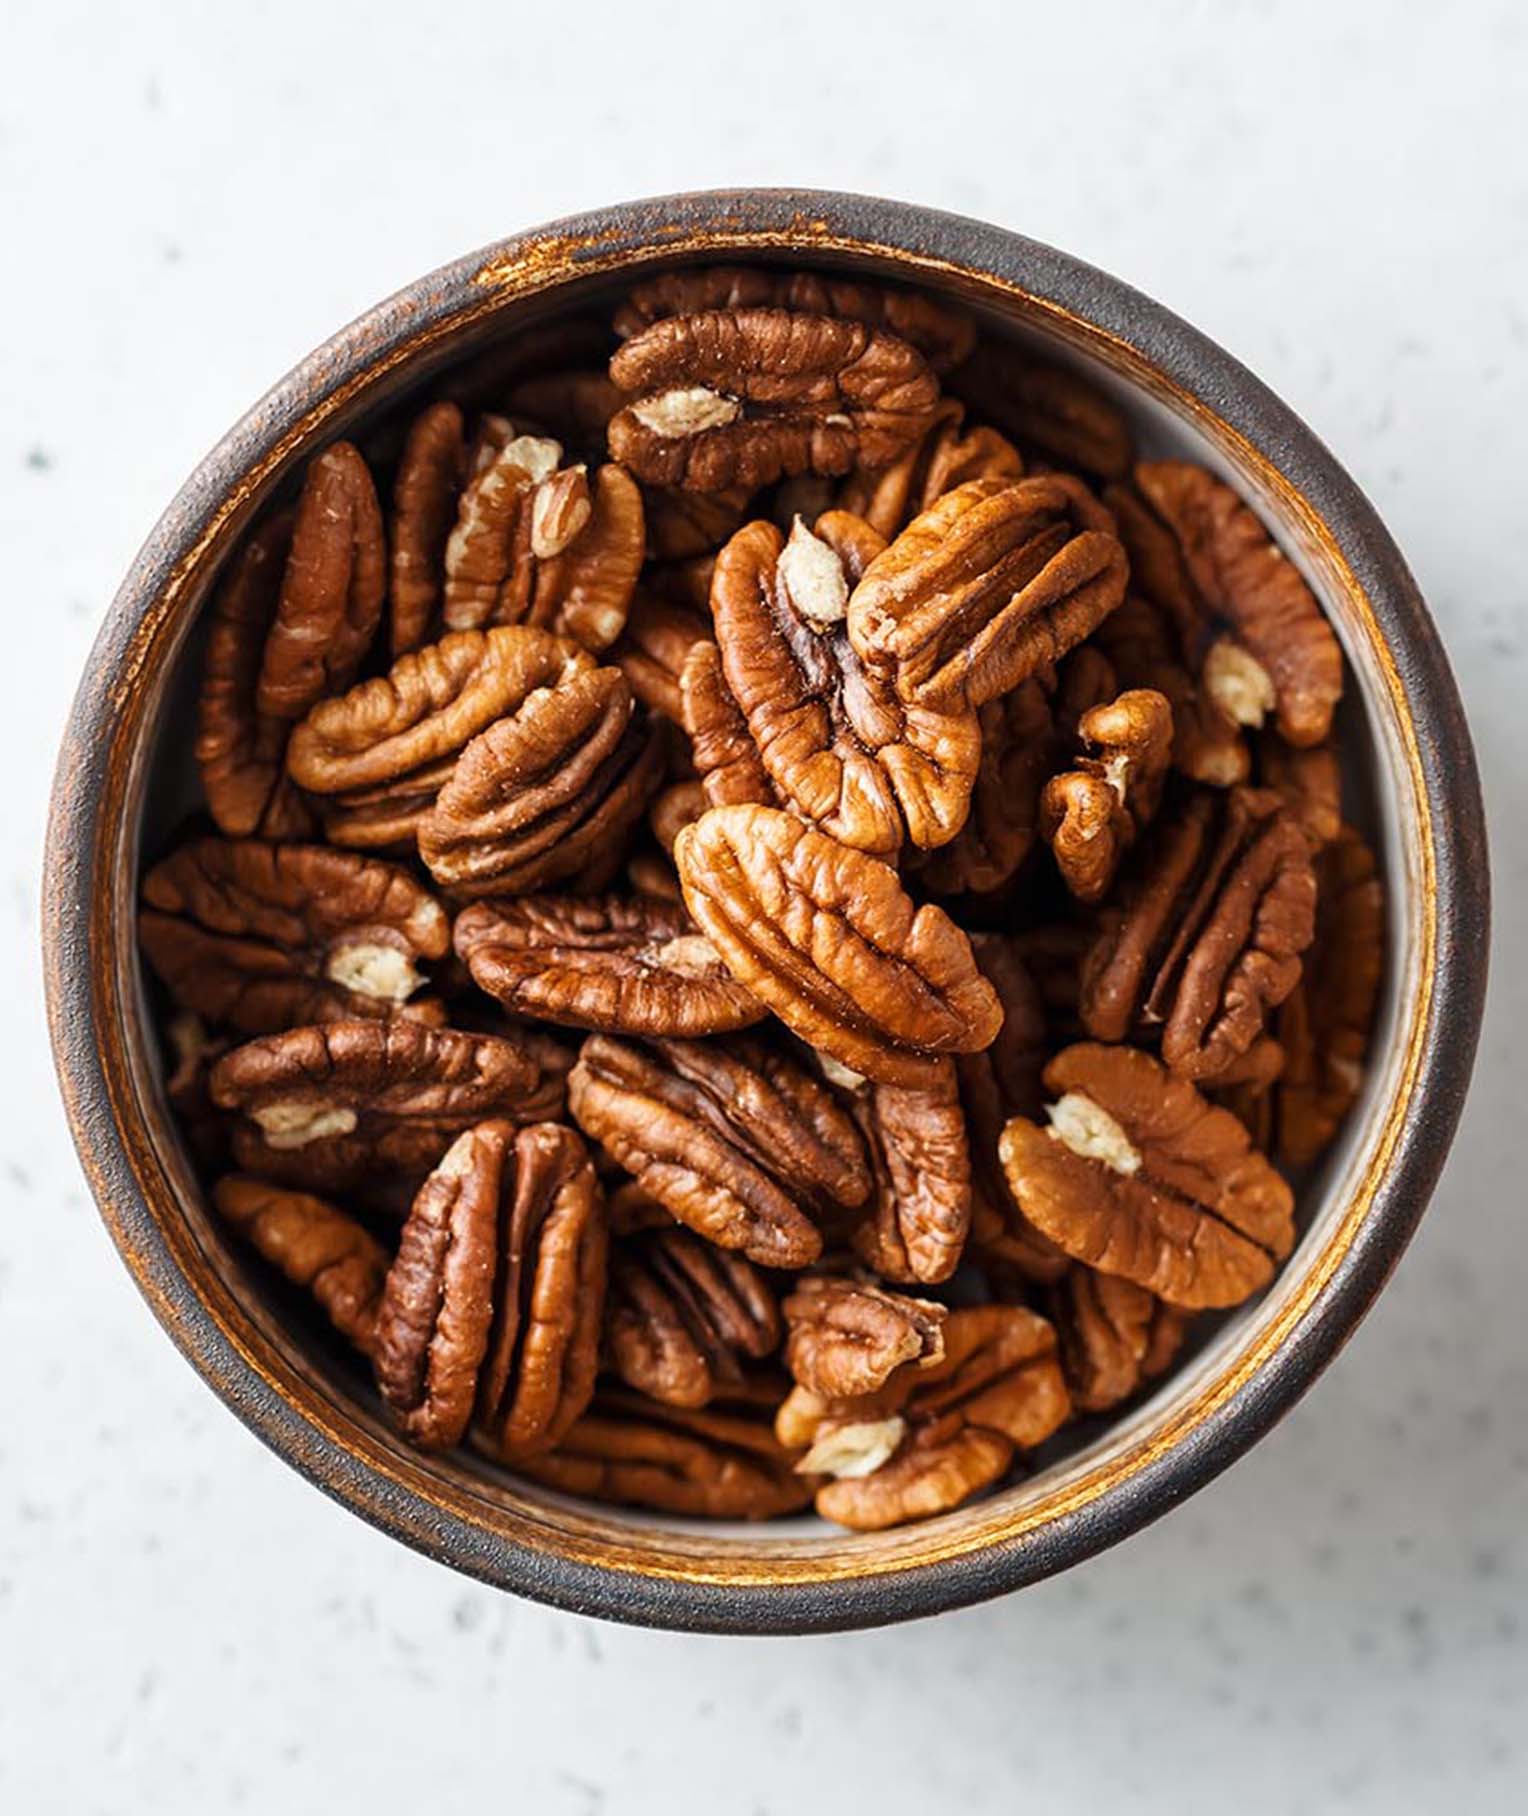 A Guide to Nutritional Value and Health Benefits of Pecan Nuts